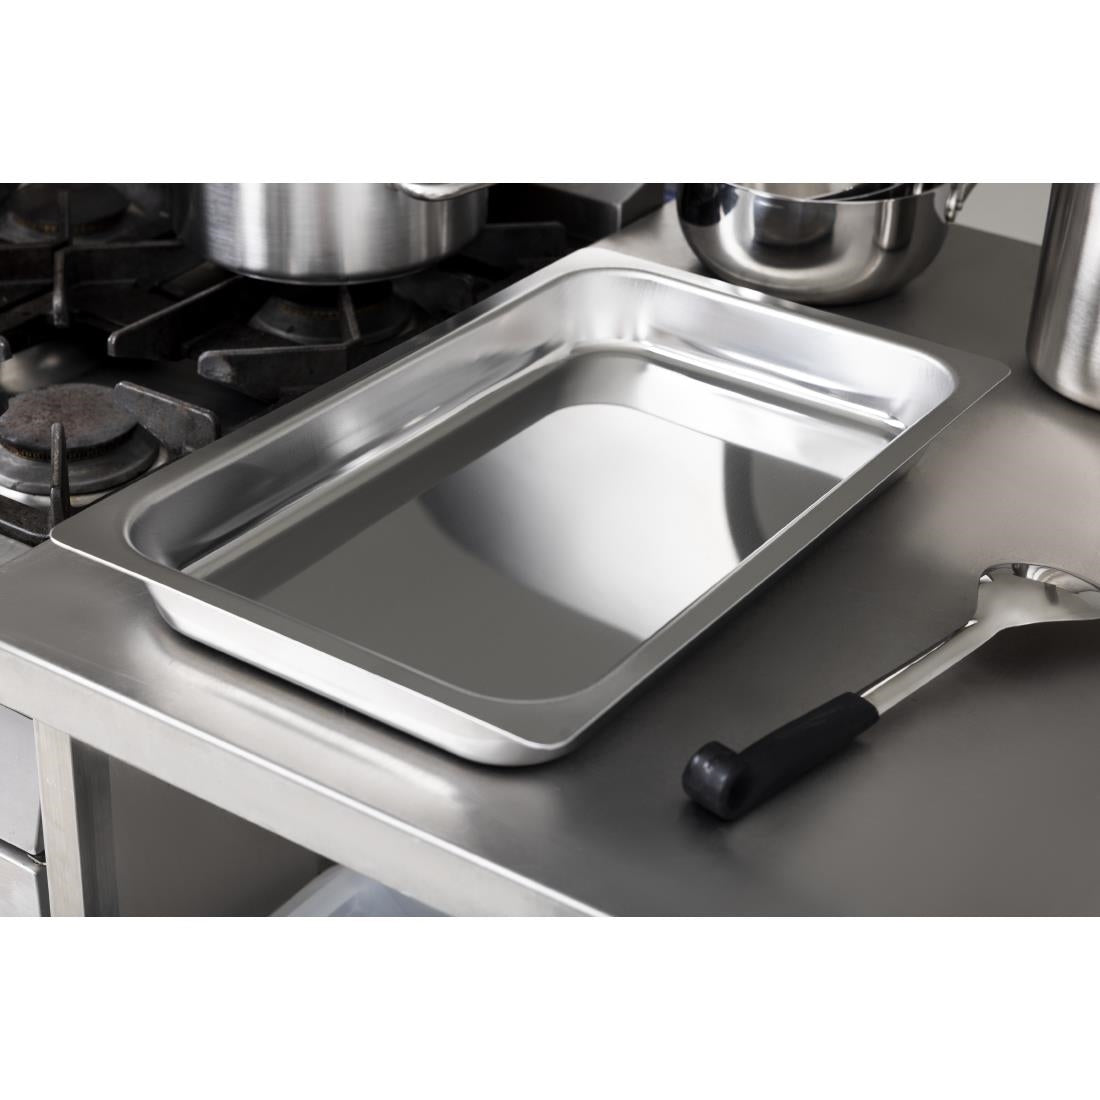 Bourgeat Stainless Steel 1/1 Gastronorm Roasting Dish 55mm JD Catering Equipment Solutions Ltd